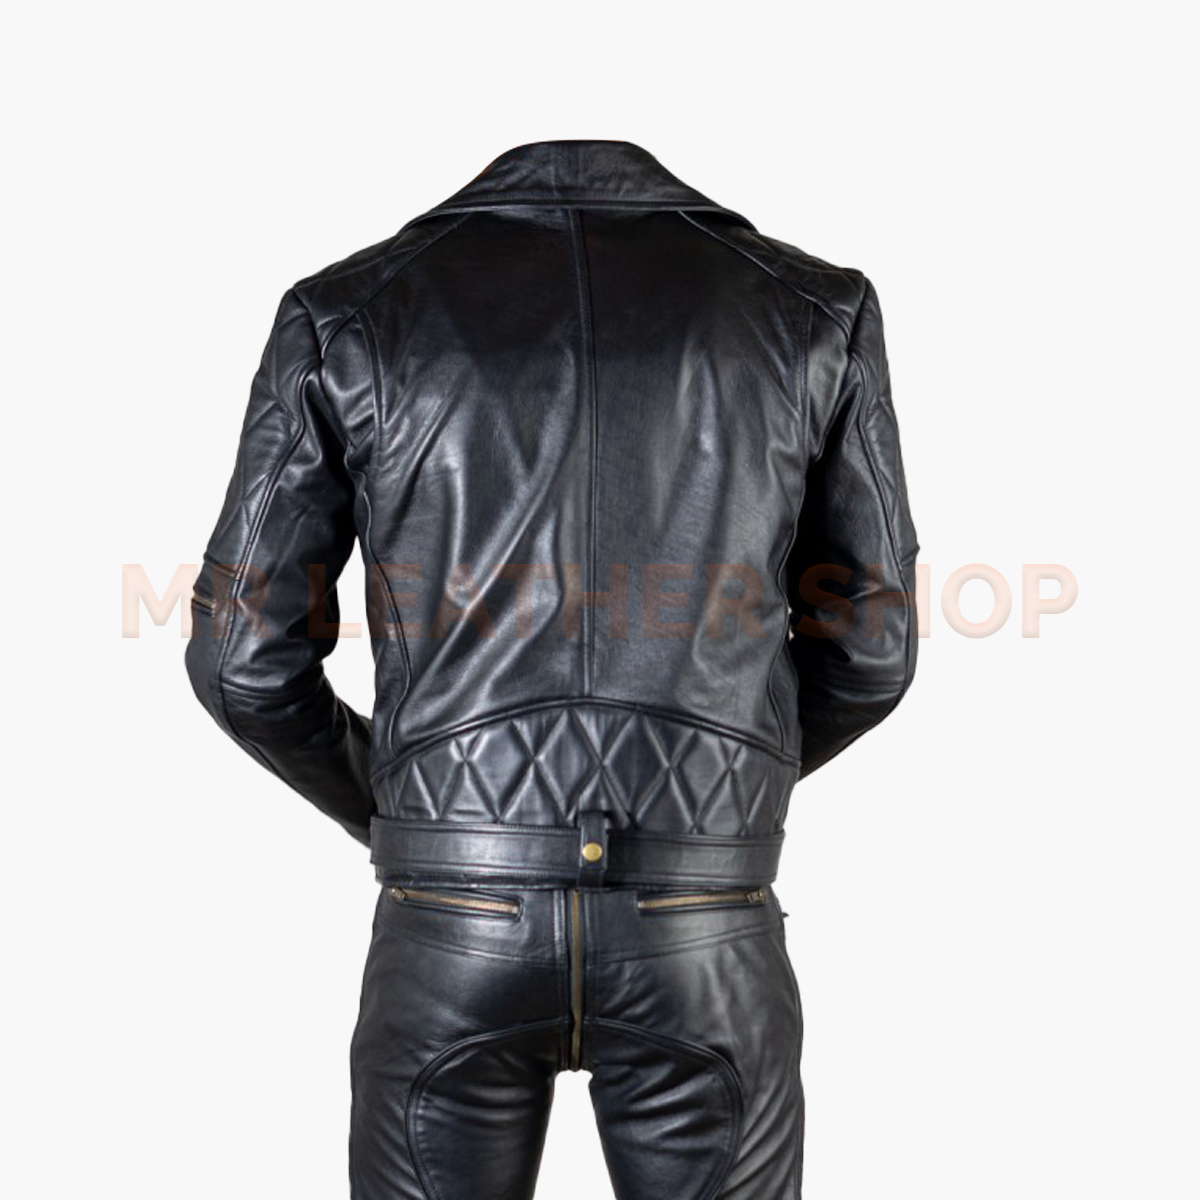 Quilted Leather Jackets ARe Specially MAde With Genuine Leather